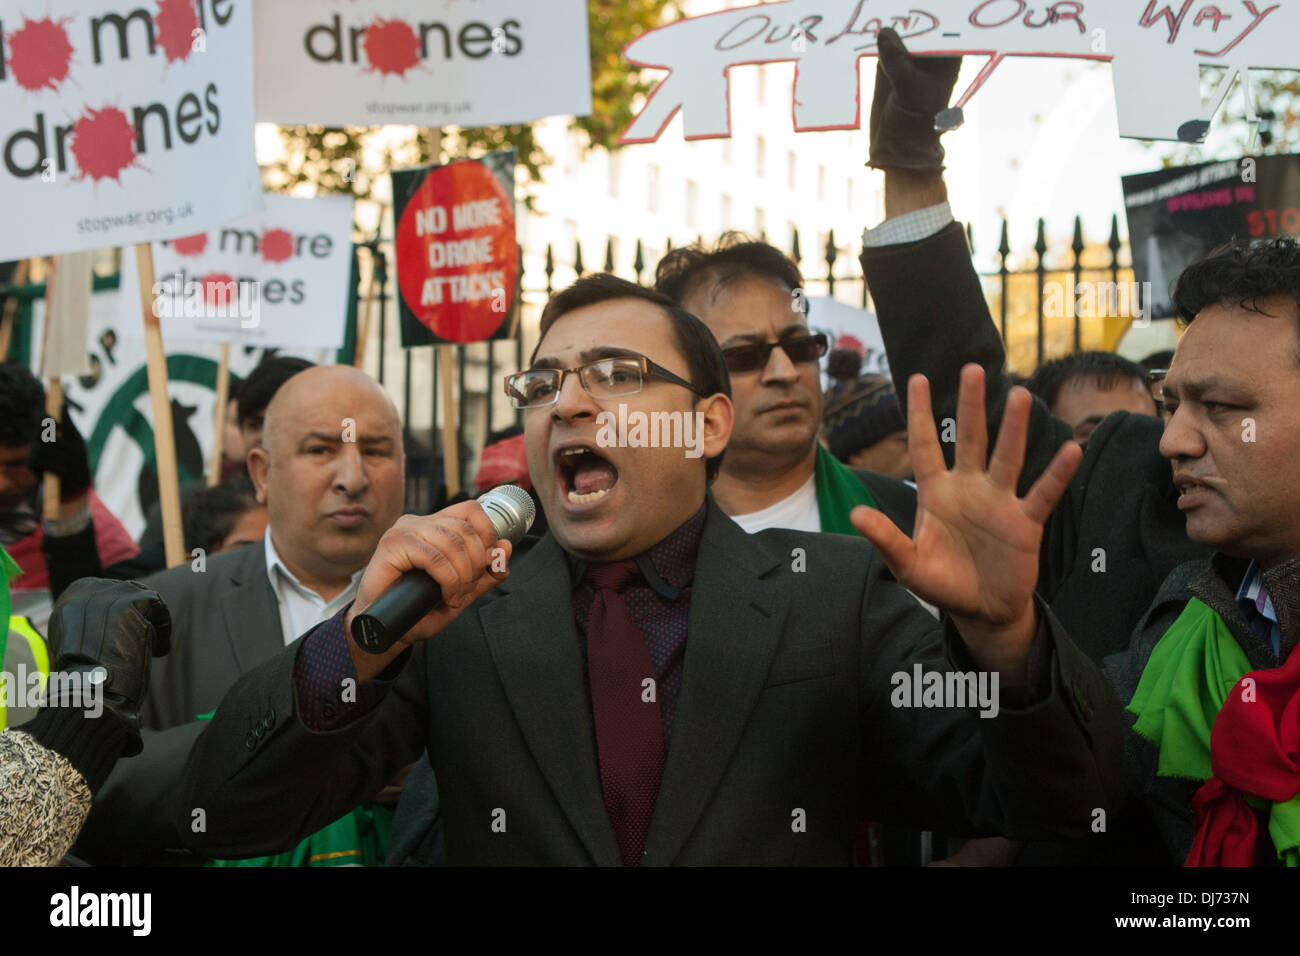 London, UK . 23rd Nov, 2013. Members and supporters of Pakistan Tehreek-e-Insaf (the Pakistani political party headed by Imran Khan) in the UK march from 10 Downing Street to the US Embassy in London to protest US drones strikes in Pakistan. London, UK 23 November 2013 Credit:  martyn wheatley/Alamy Live News Stock Photo